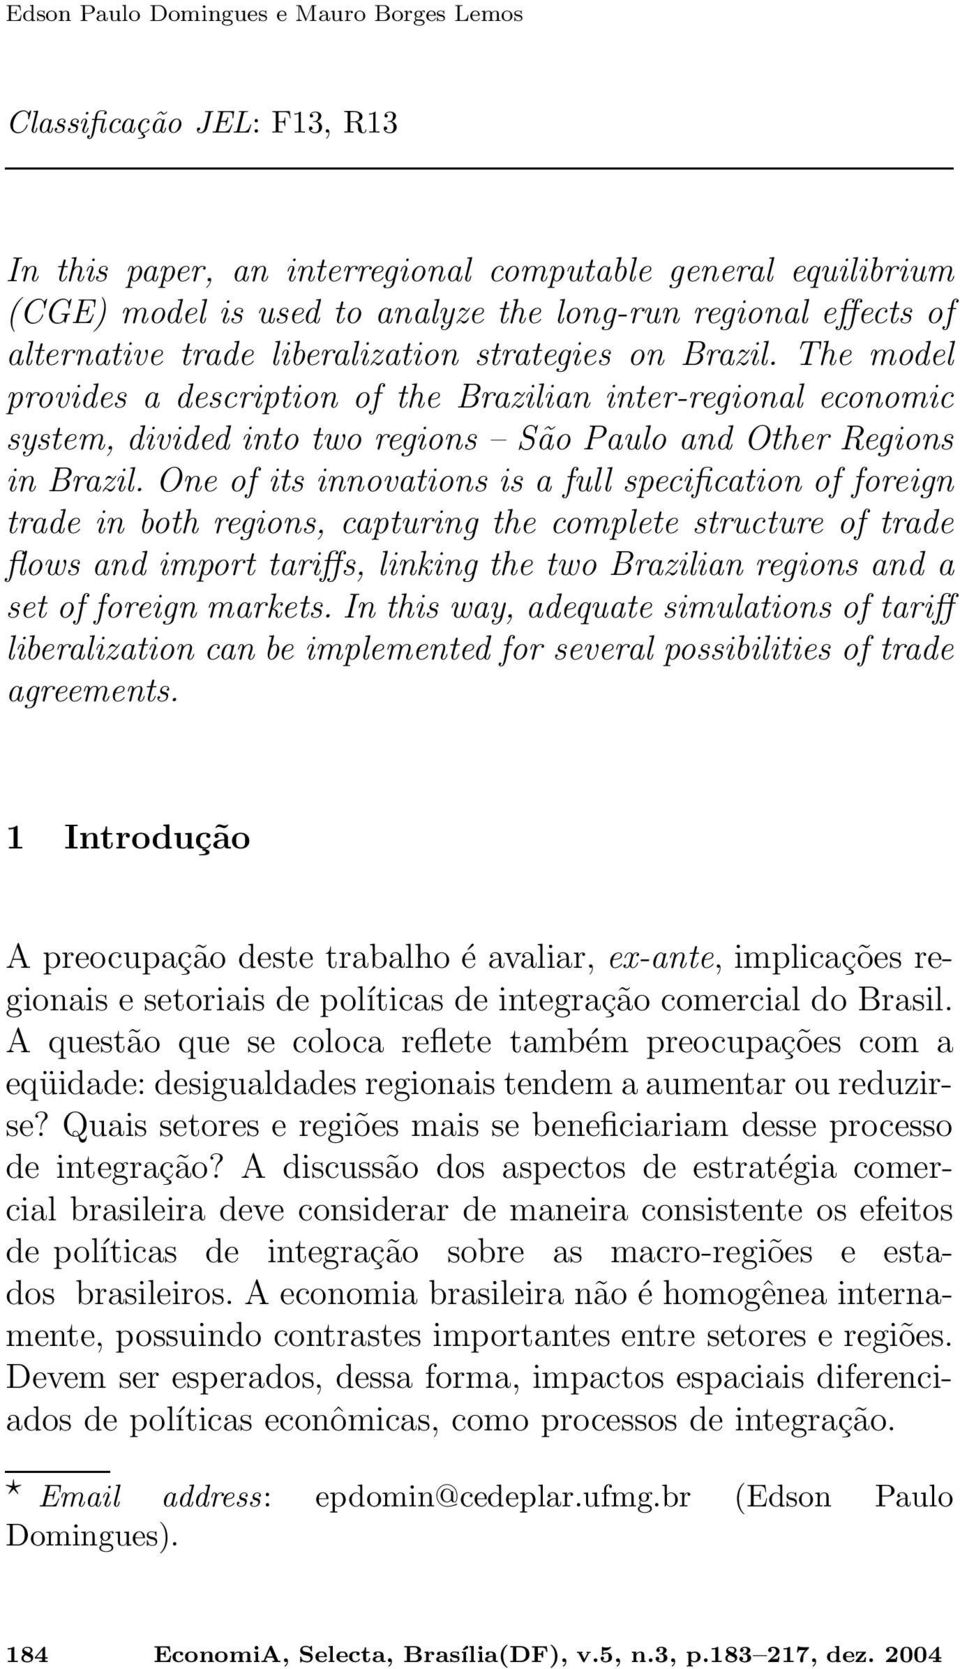 One of its innovations is a full specification of foreign trade in both regions, capturing the complete structure of trade flows and import tariffs, linking the two Brazilian regions and a set of